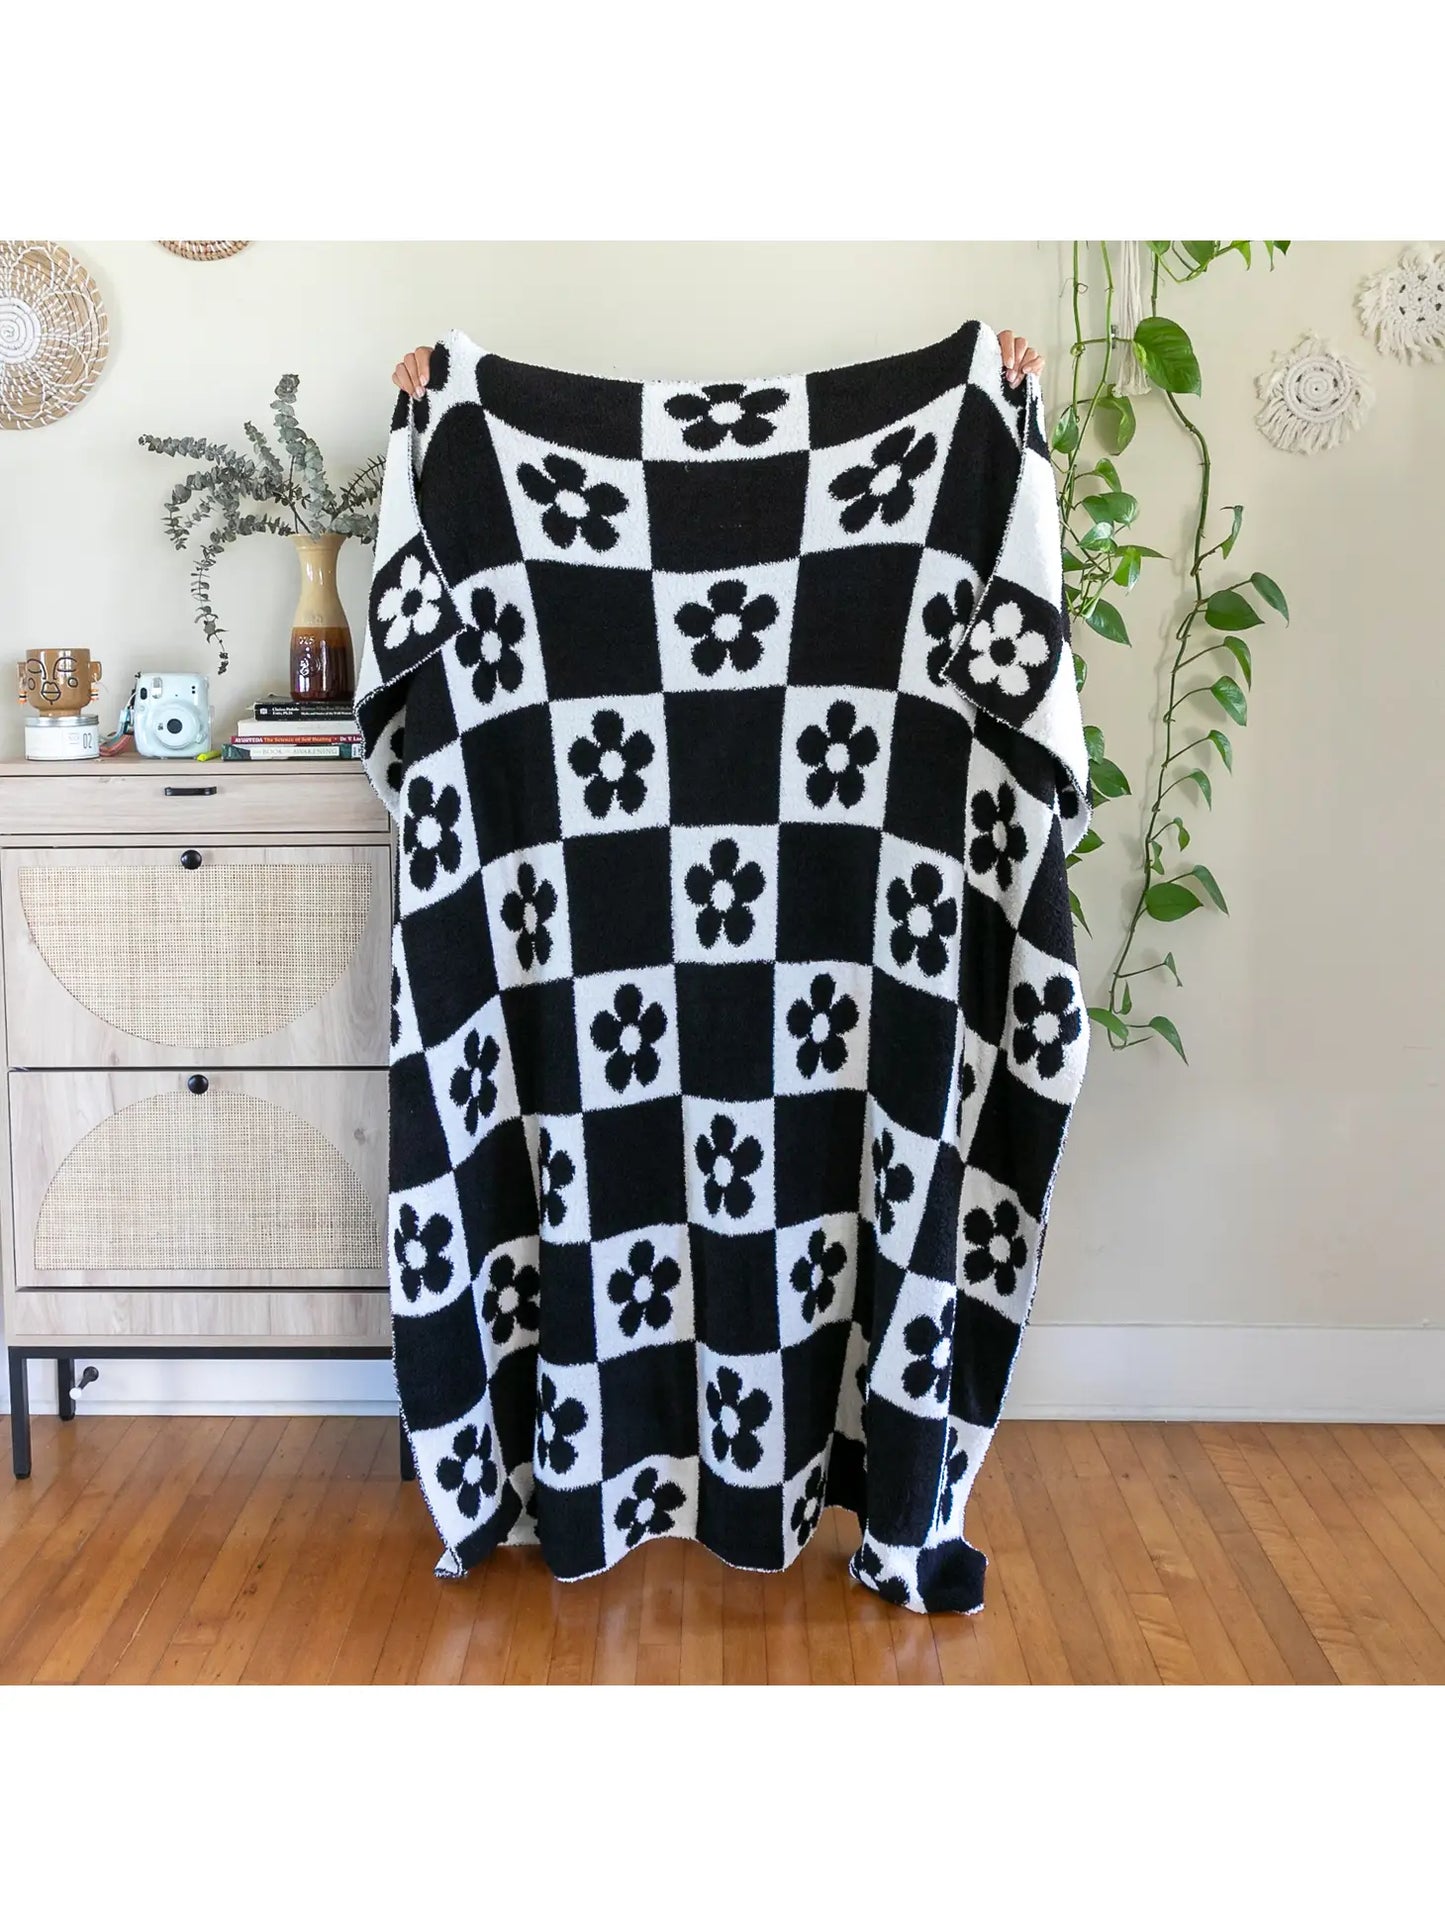 Load image into Gallery viewer, daisy checkered blanket
